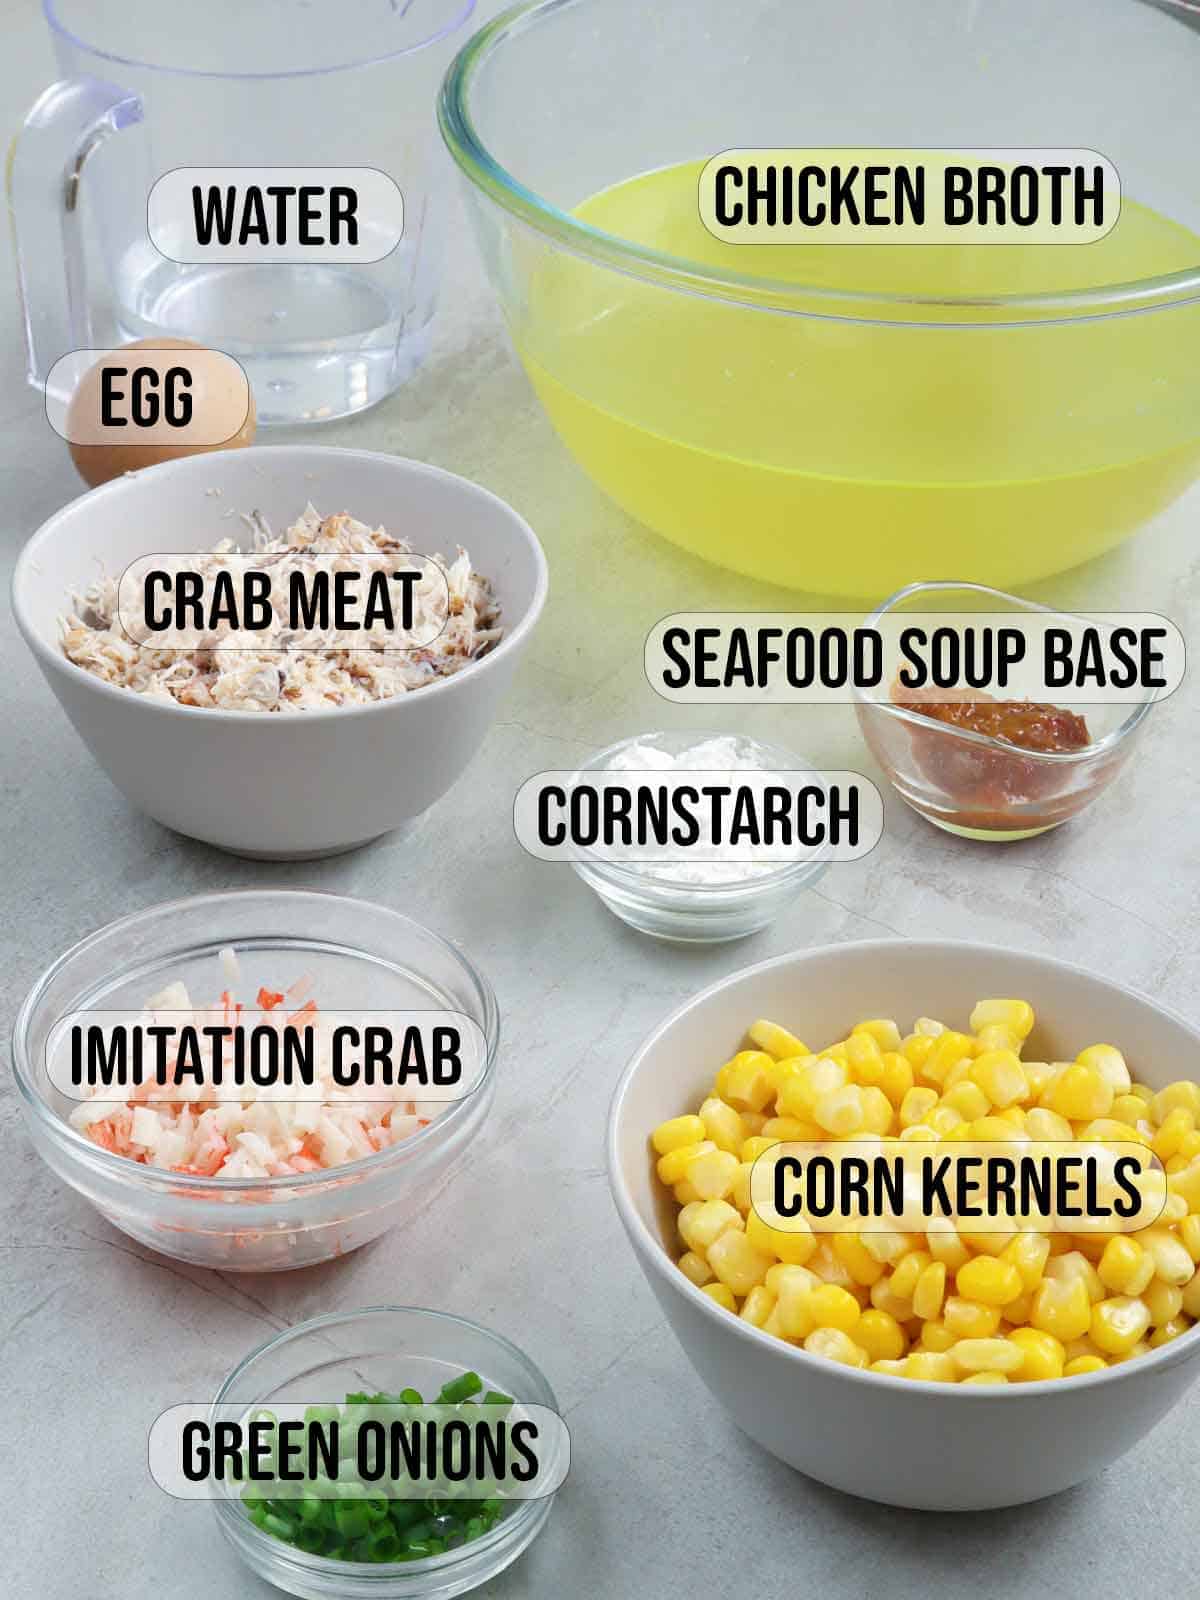 lump crab meat, imitation crab, corn kernels, chopped green onions, chicken broth, corn starch, seafood base, egg in bowls.